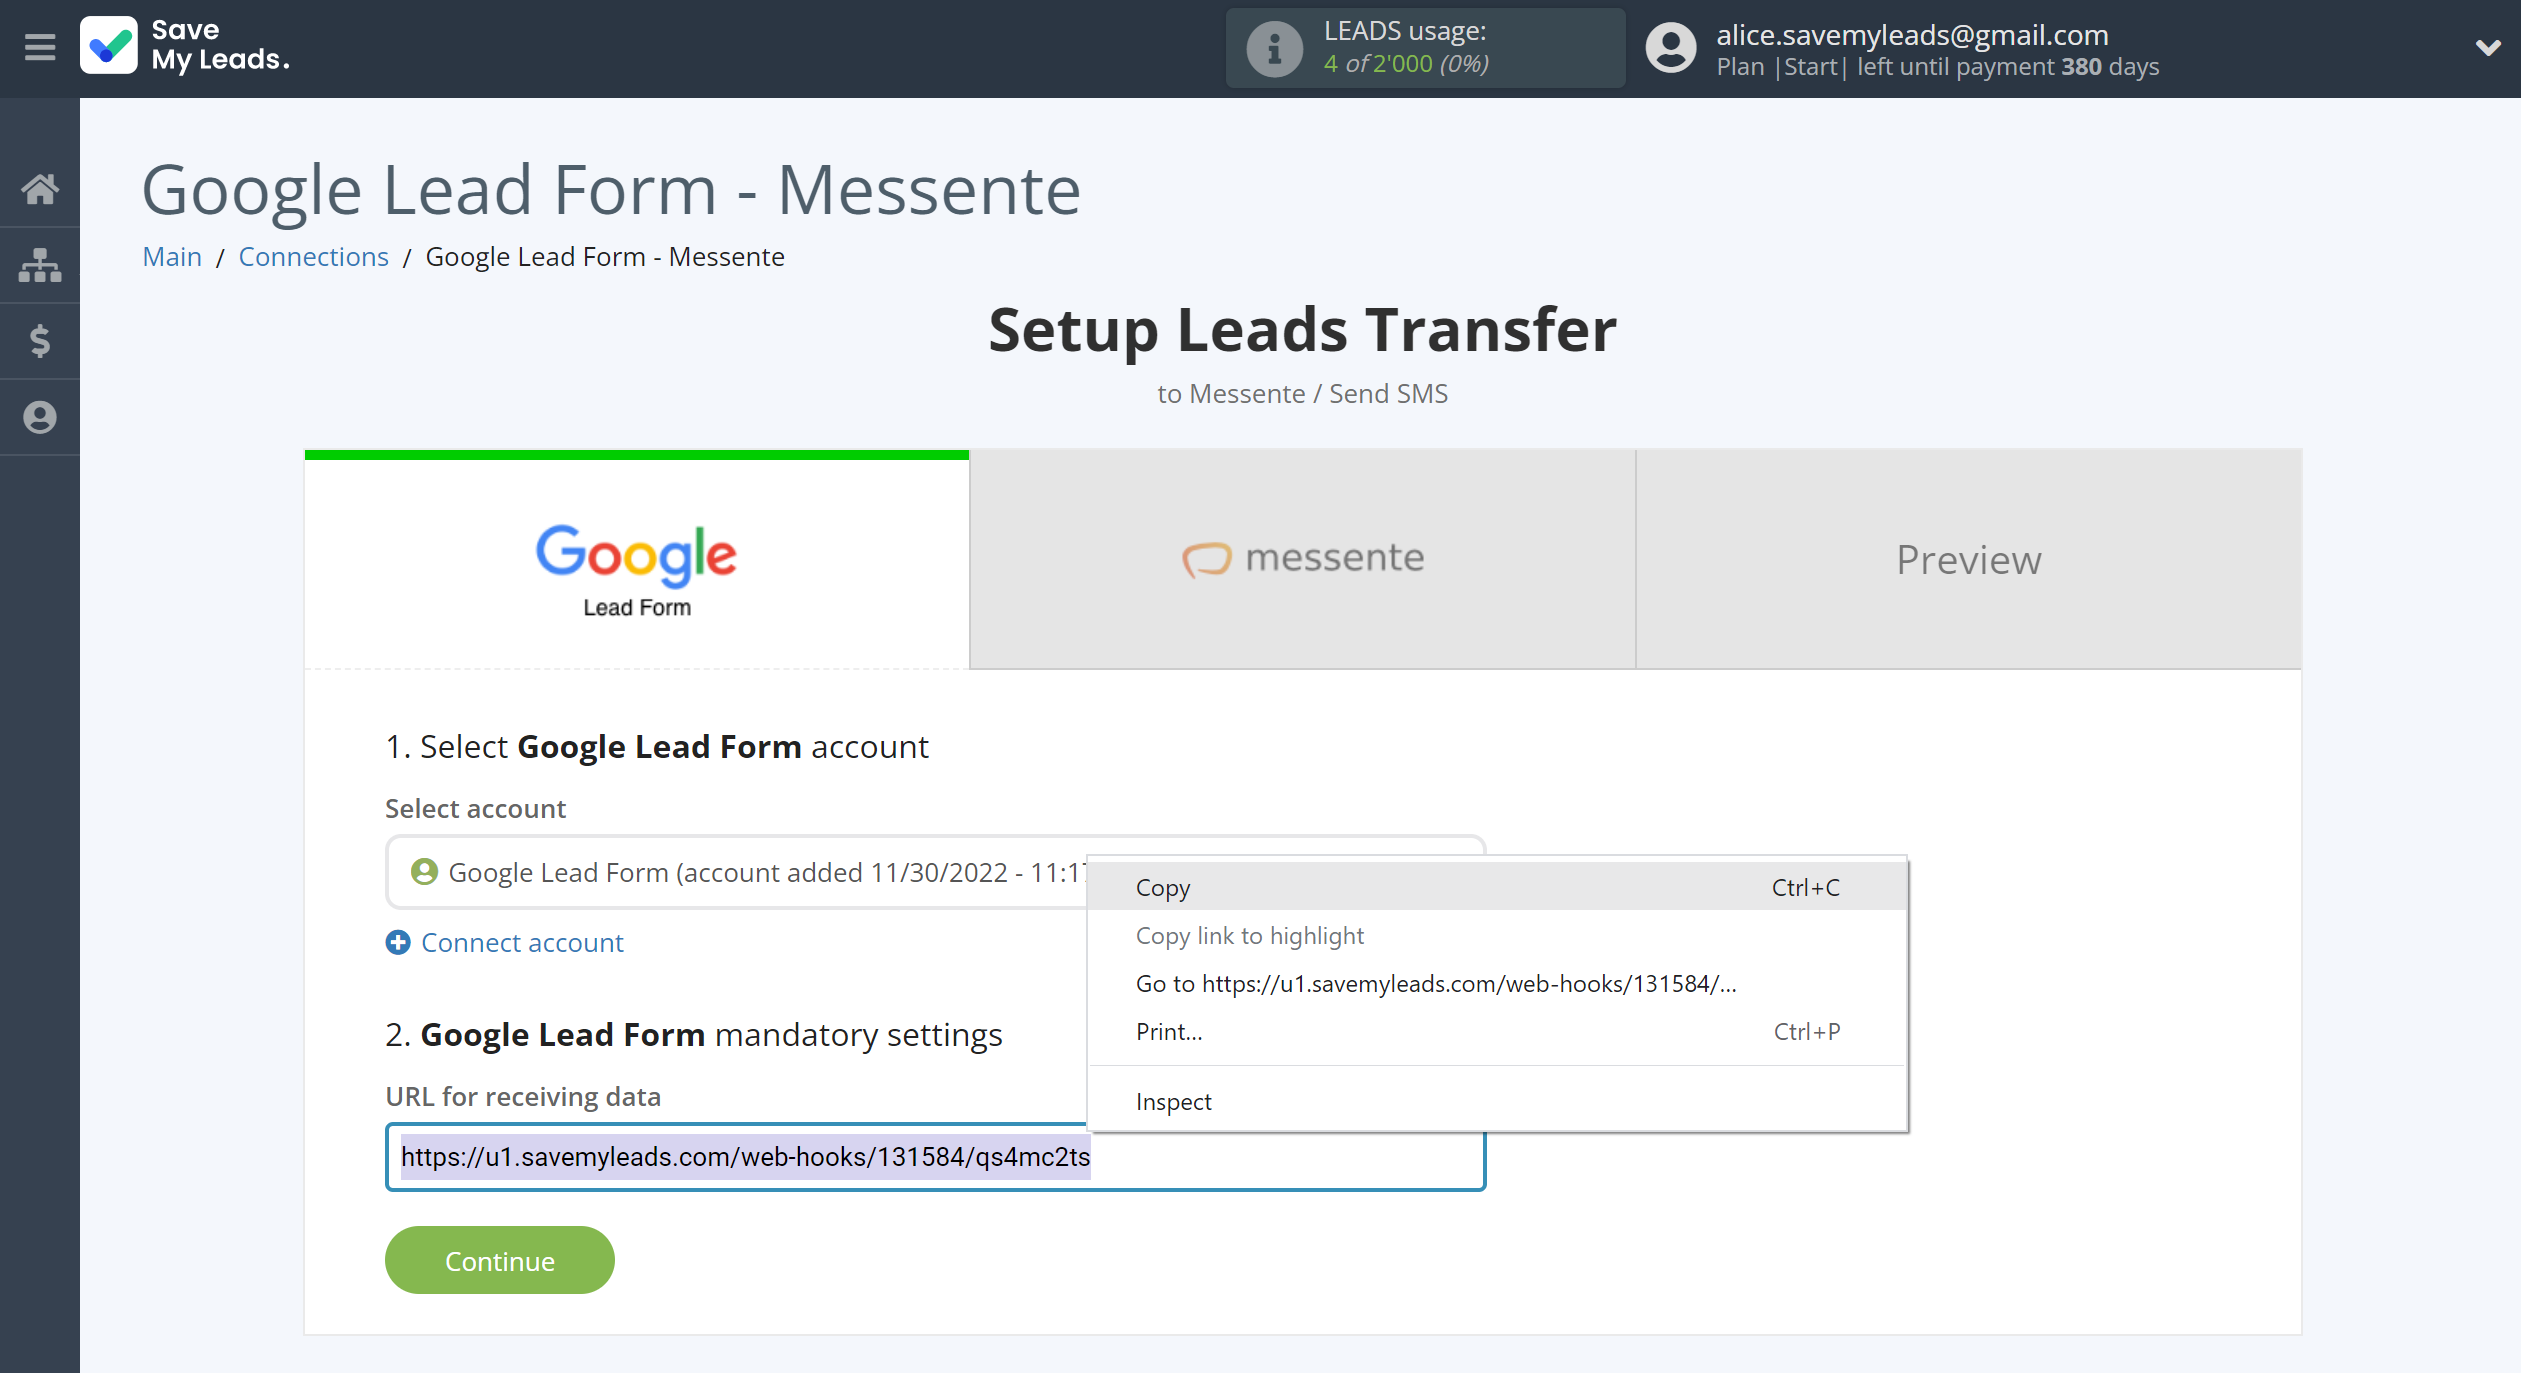 How to Connect Google Lead Form with Messente | Data Source account connection